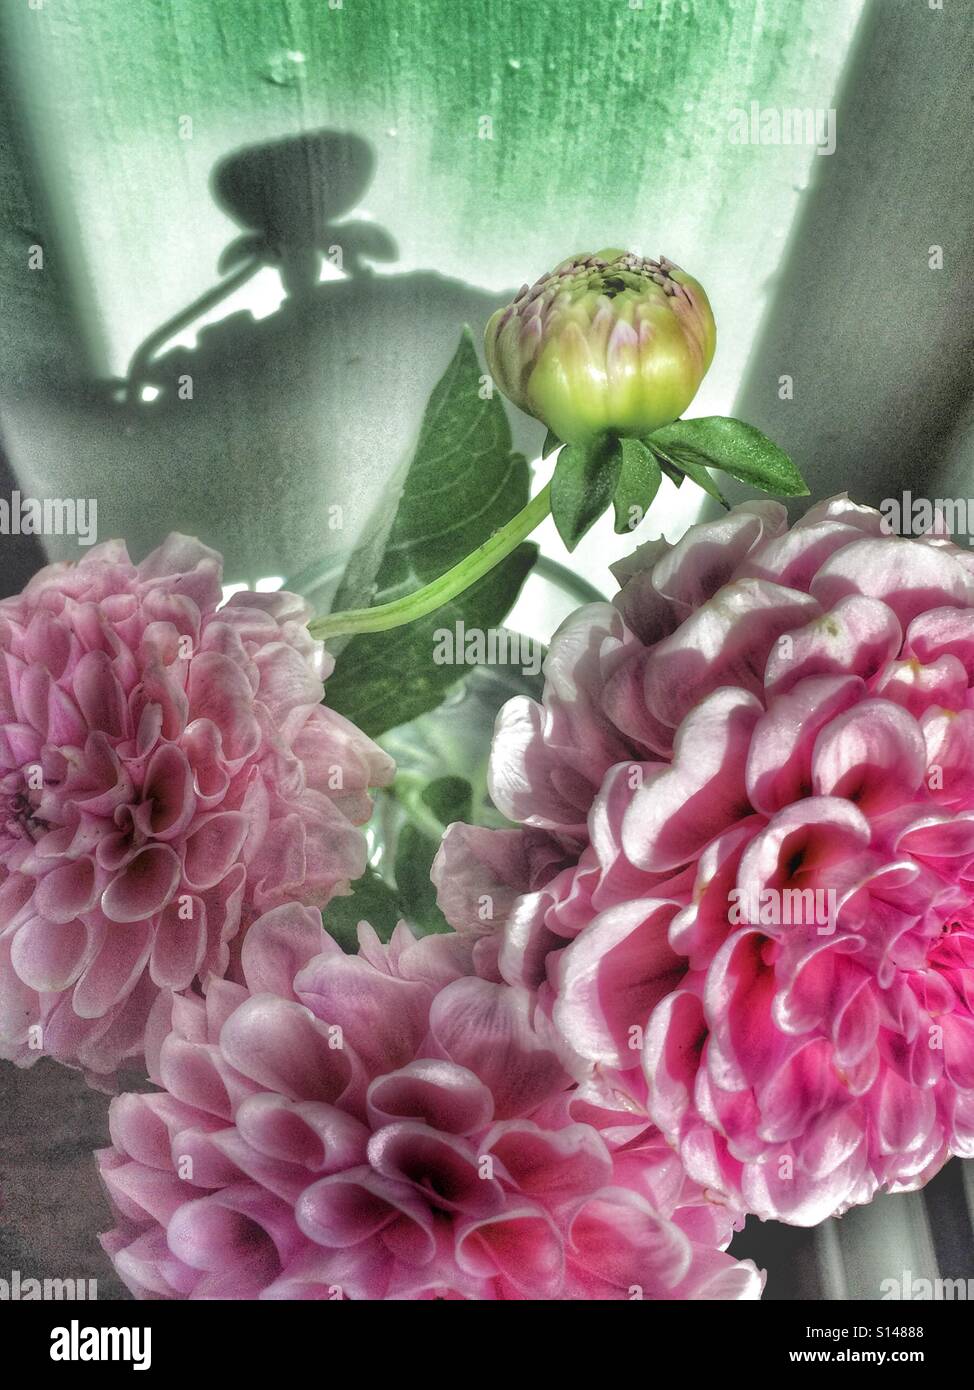 Flowers in a vase Stock Photo